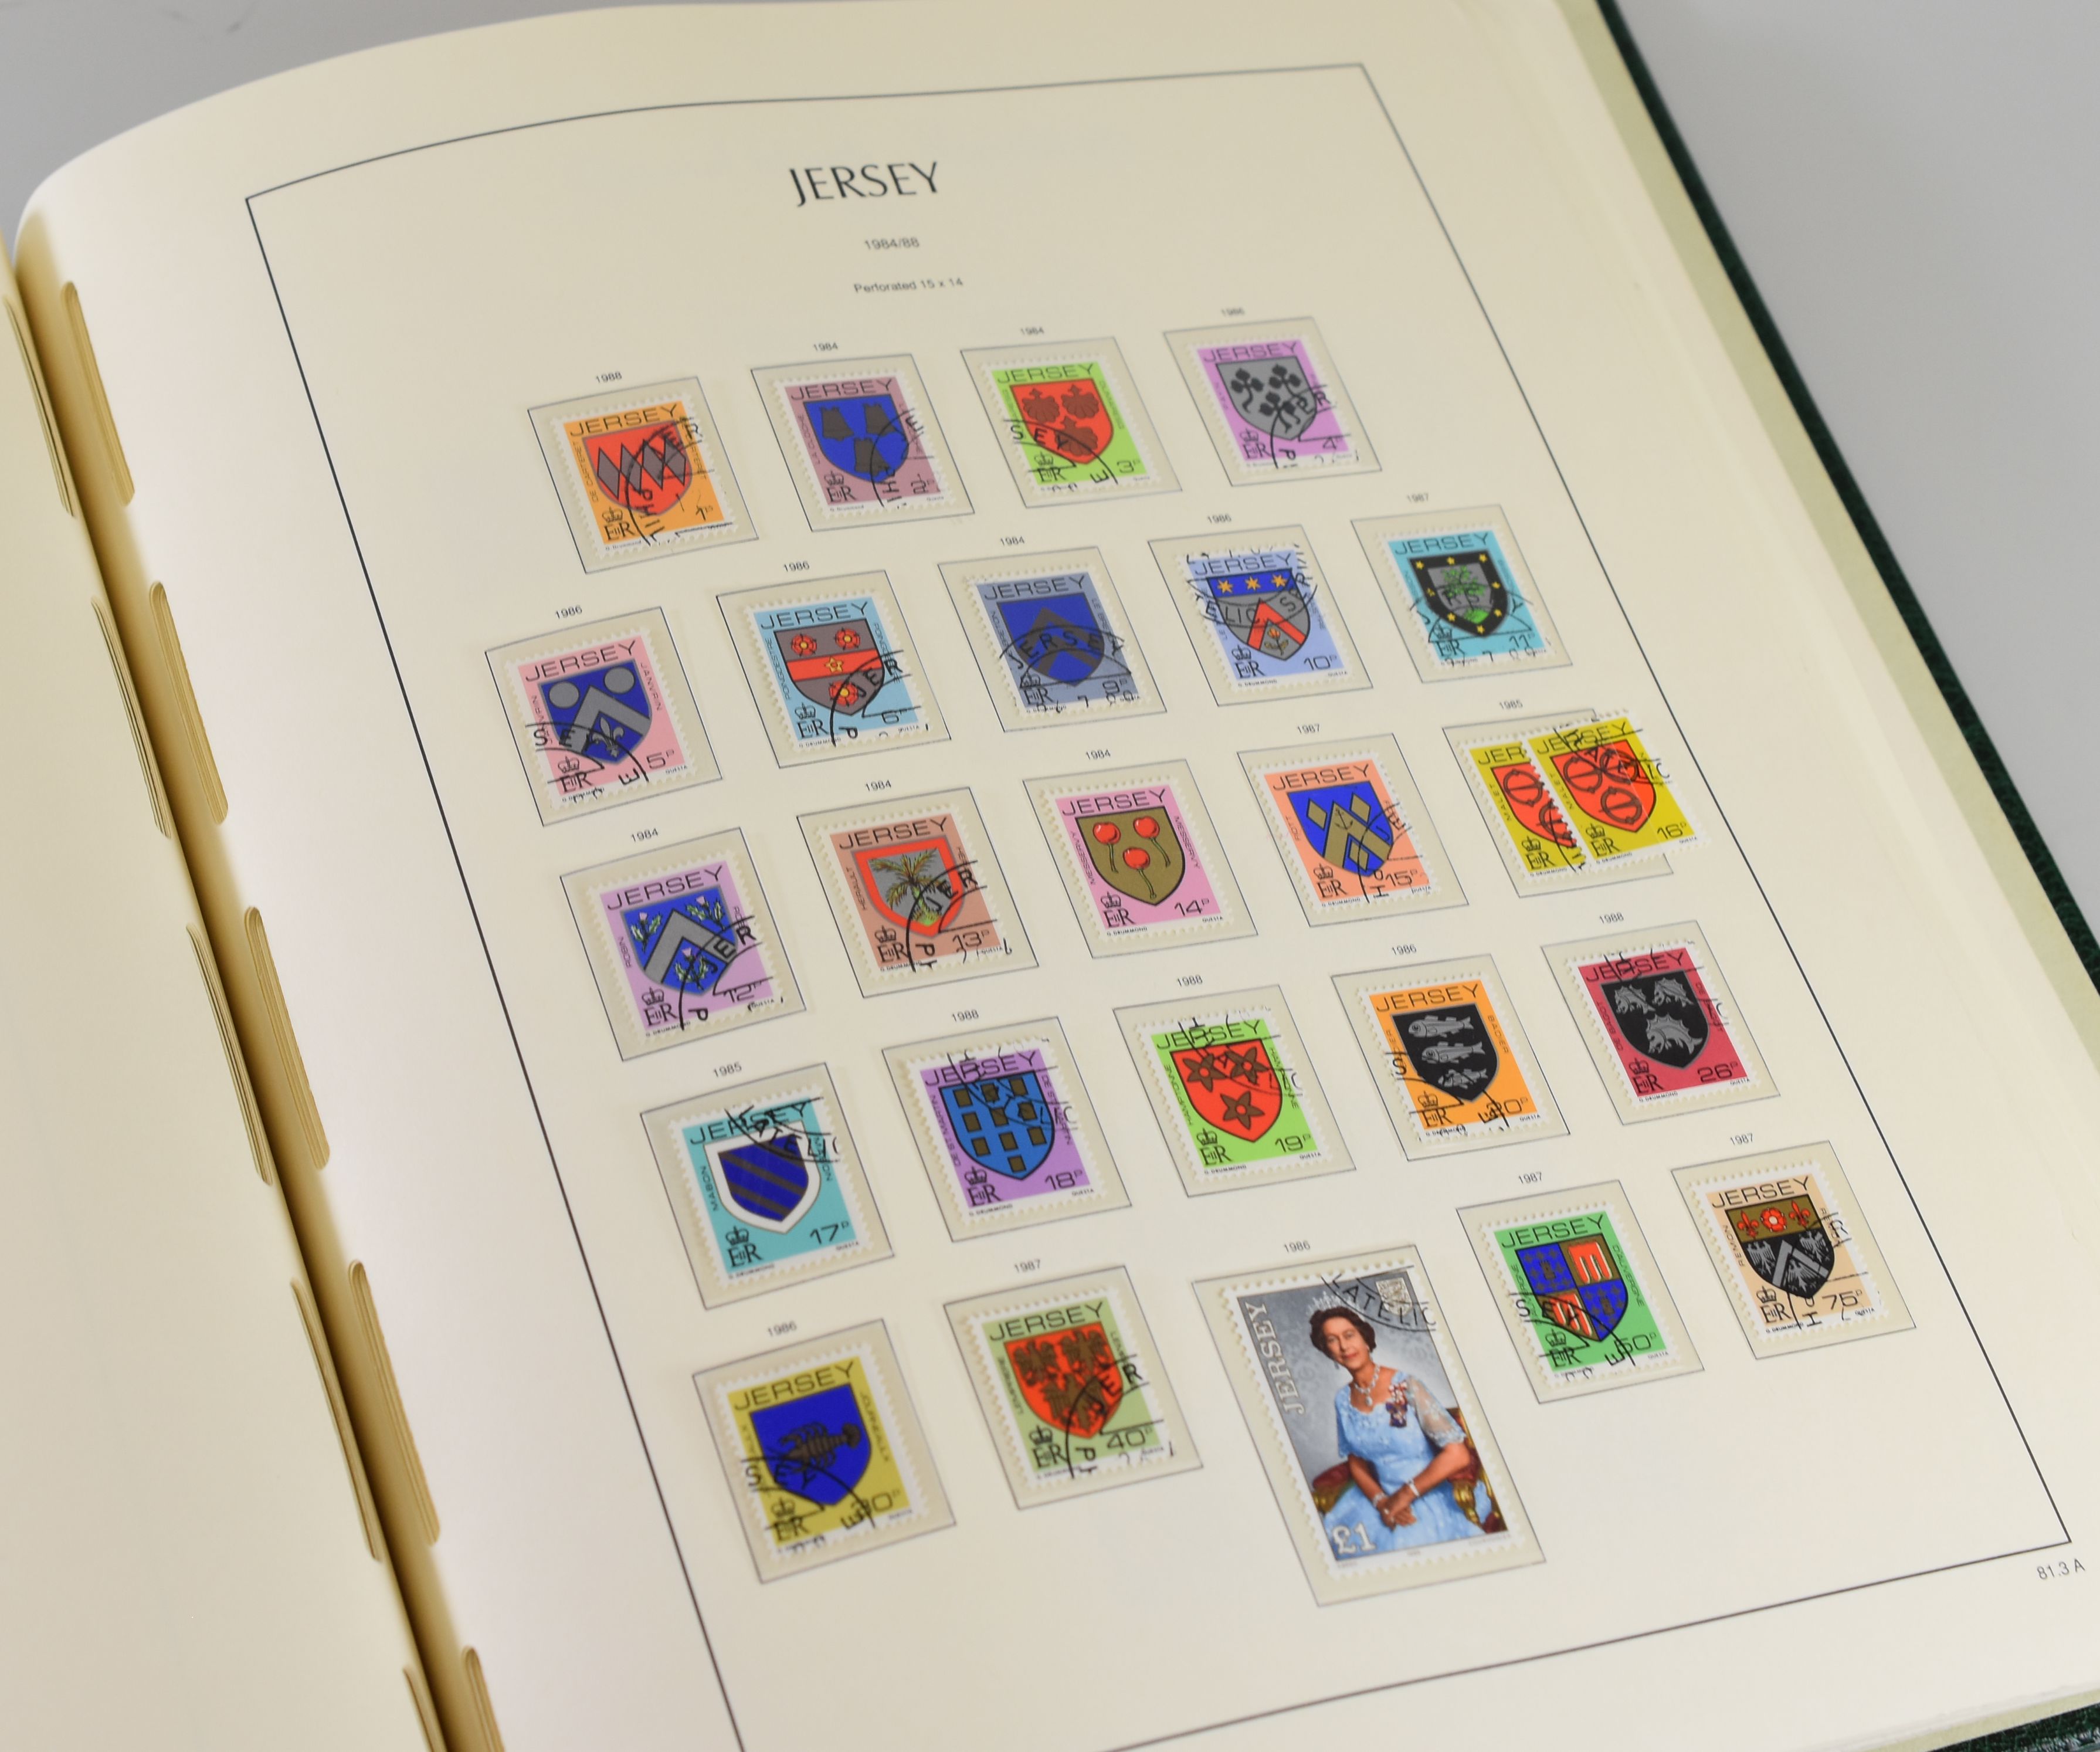 AN ALBUM OF JERSEY STAMPS partially completed from 1969 onwards & FIFTEEN ALBUMS OF JERSEY / CHANNEL